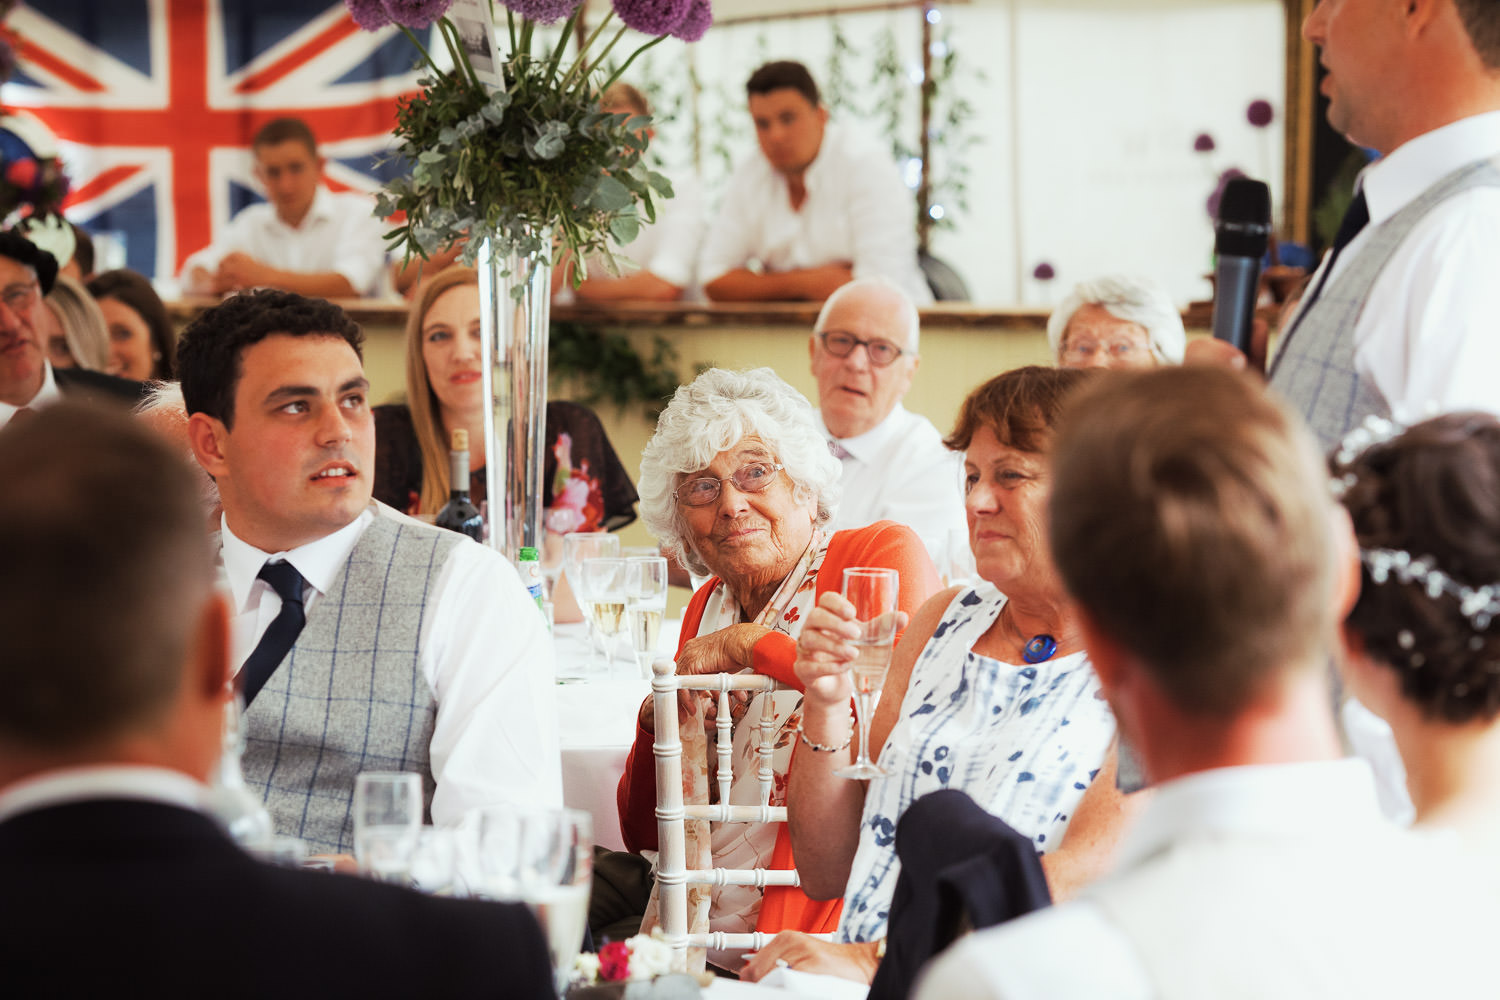 Woman watching the groom give a speech.